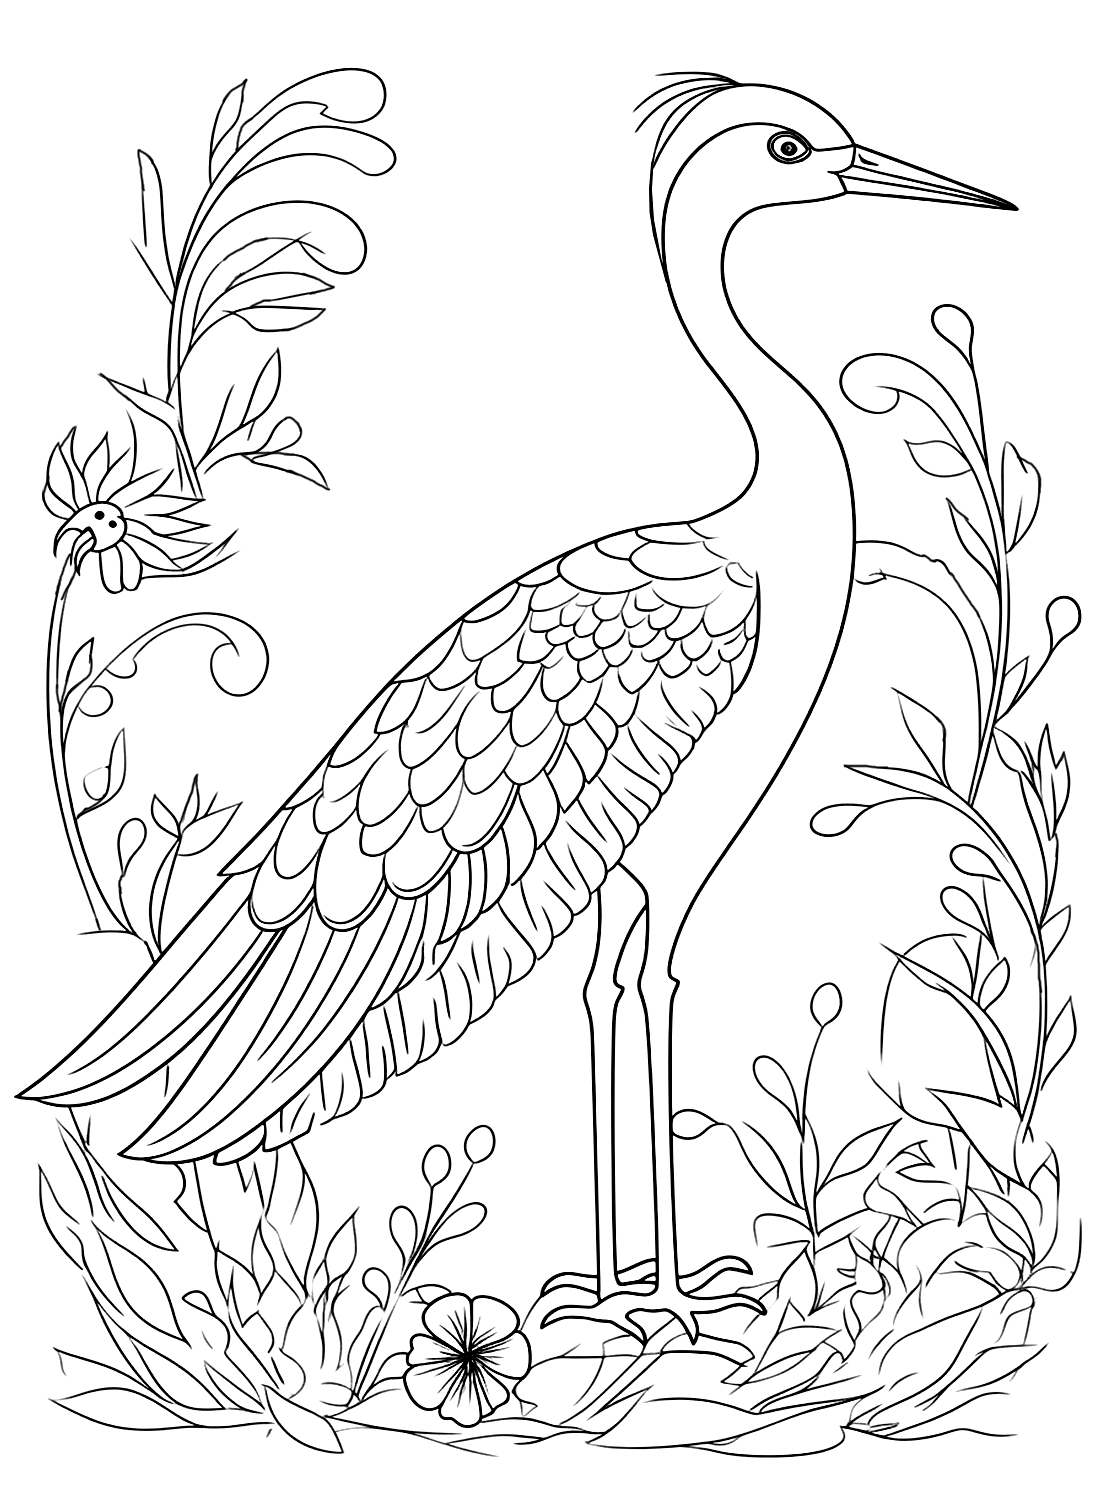 Stork with Colorful Feathers Coloring Page - Free Printable Coloring Pages